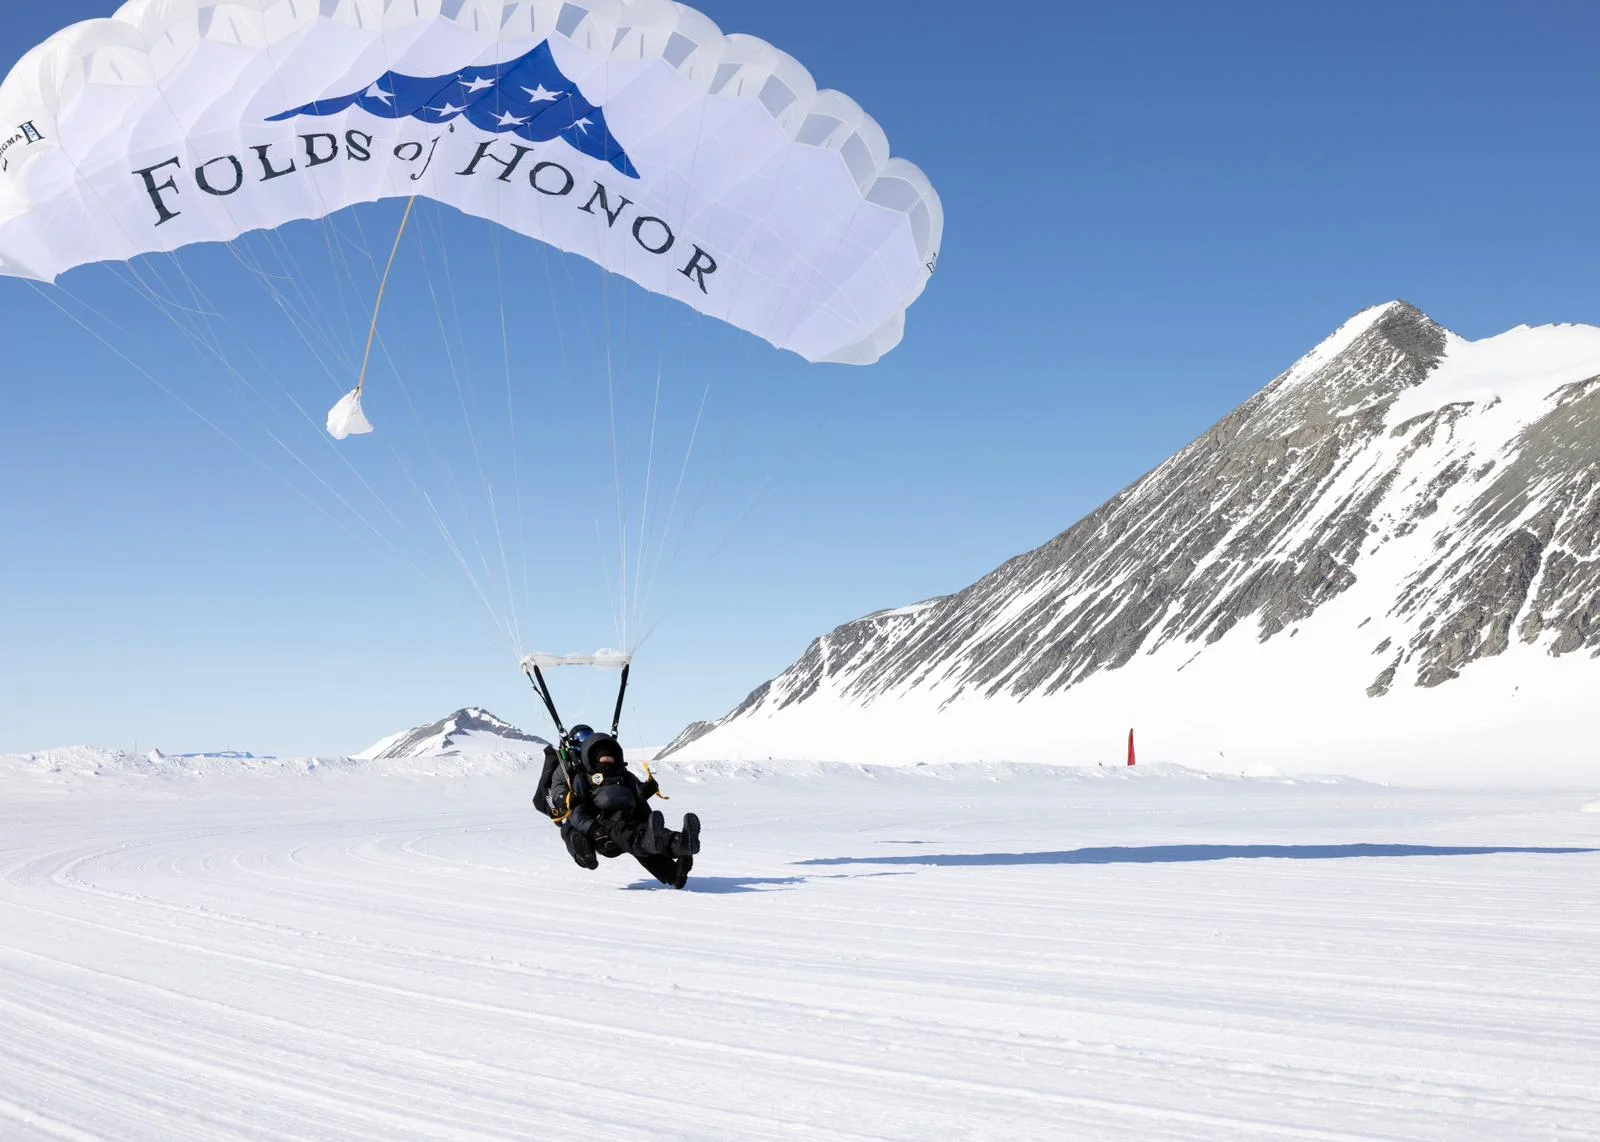 Triple 7 tandem master, Nick Kush, lands with team member Jim Wigginton at Union Glacier Camp, Antarctica, January 2023. Photo by ALE (Antarctica Logistics & Expeditions).